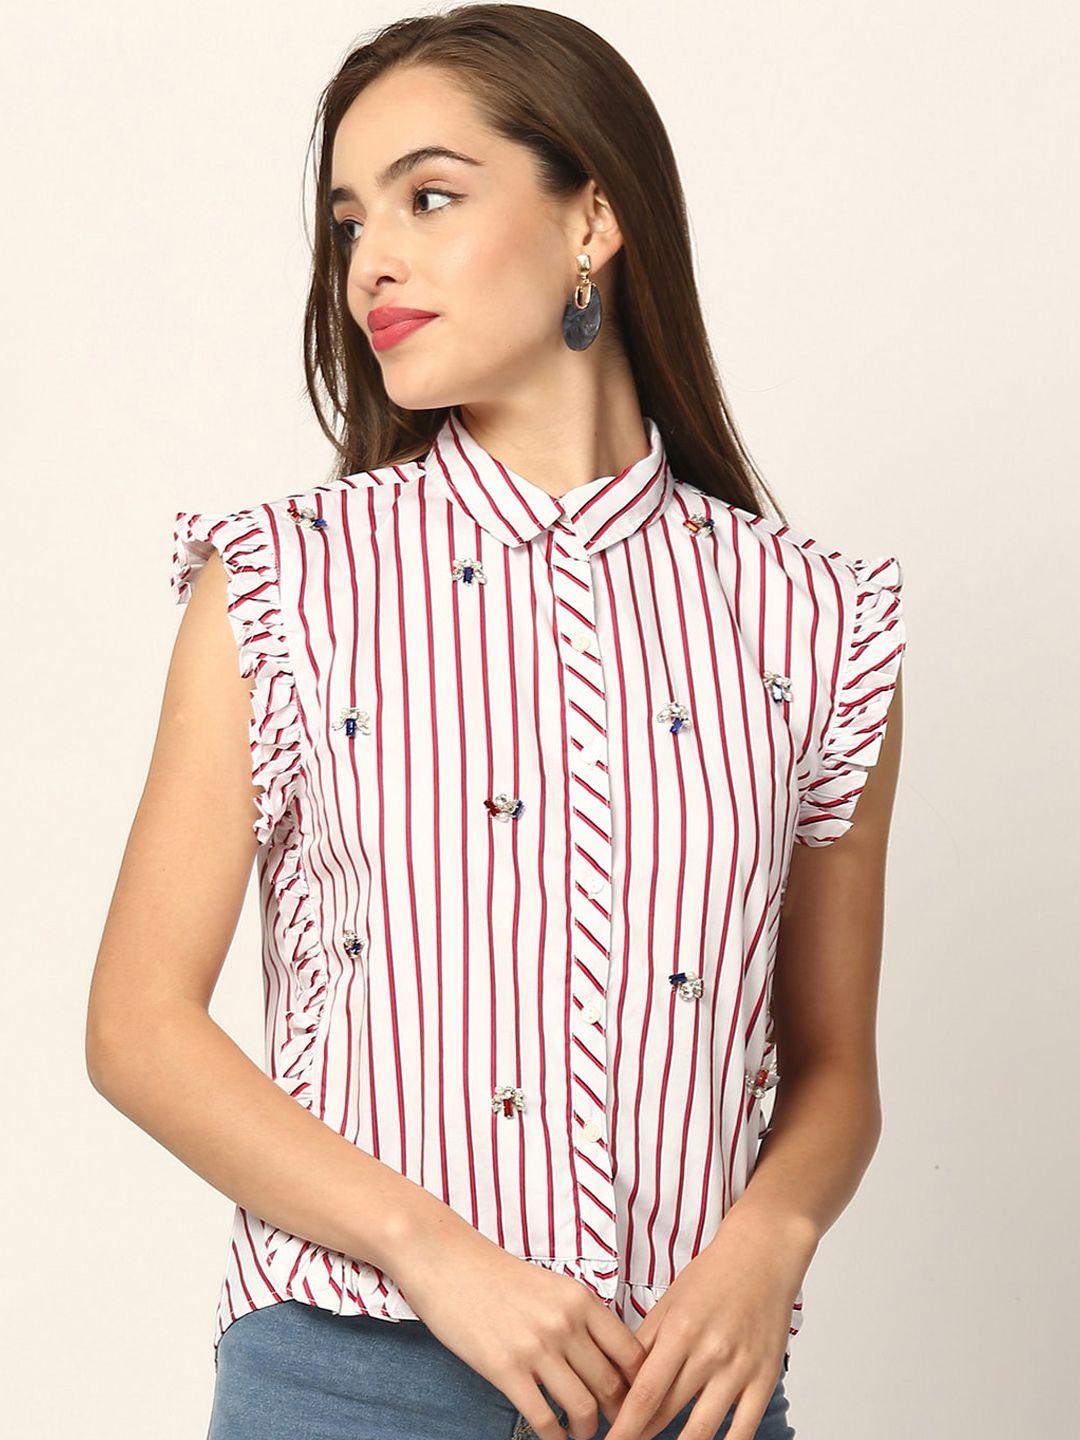 elle multicoloured striped shirt style top